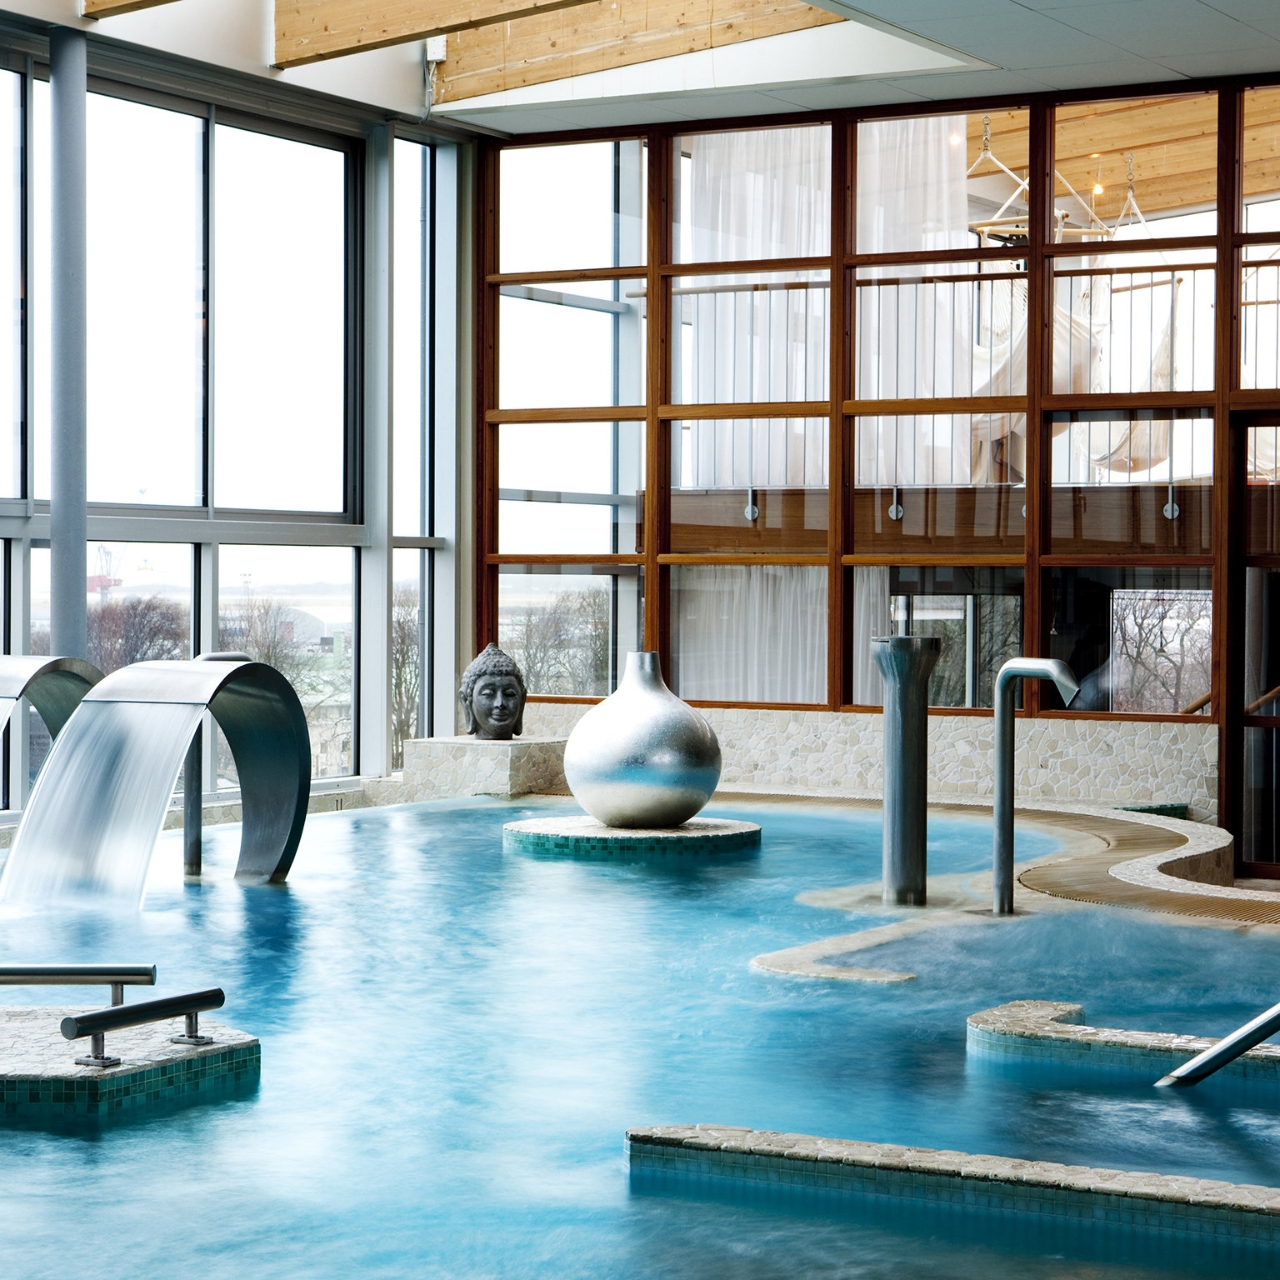 Varbergs Stadshotell & Asia Spa - 4 HRS star hotel in Varberg (Halland)